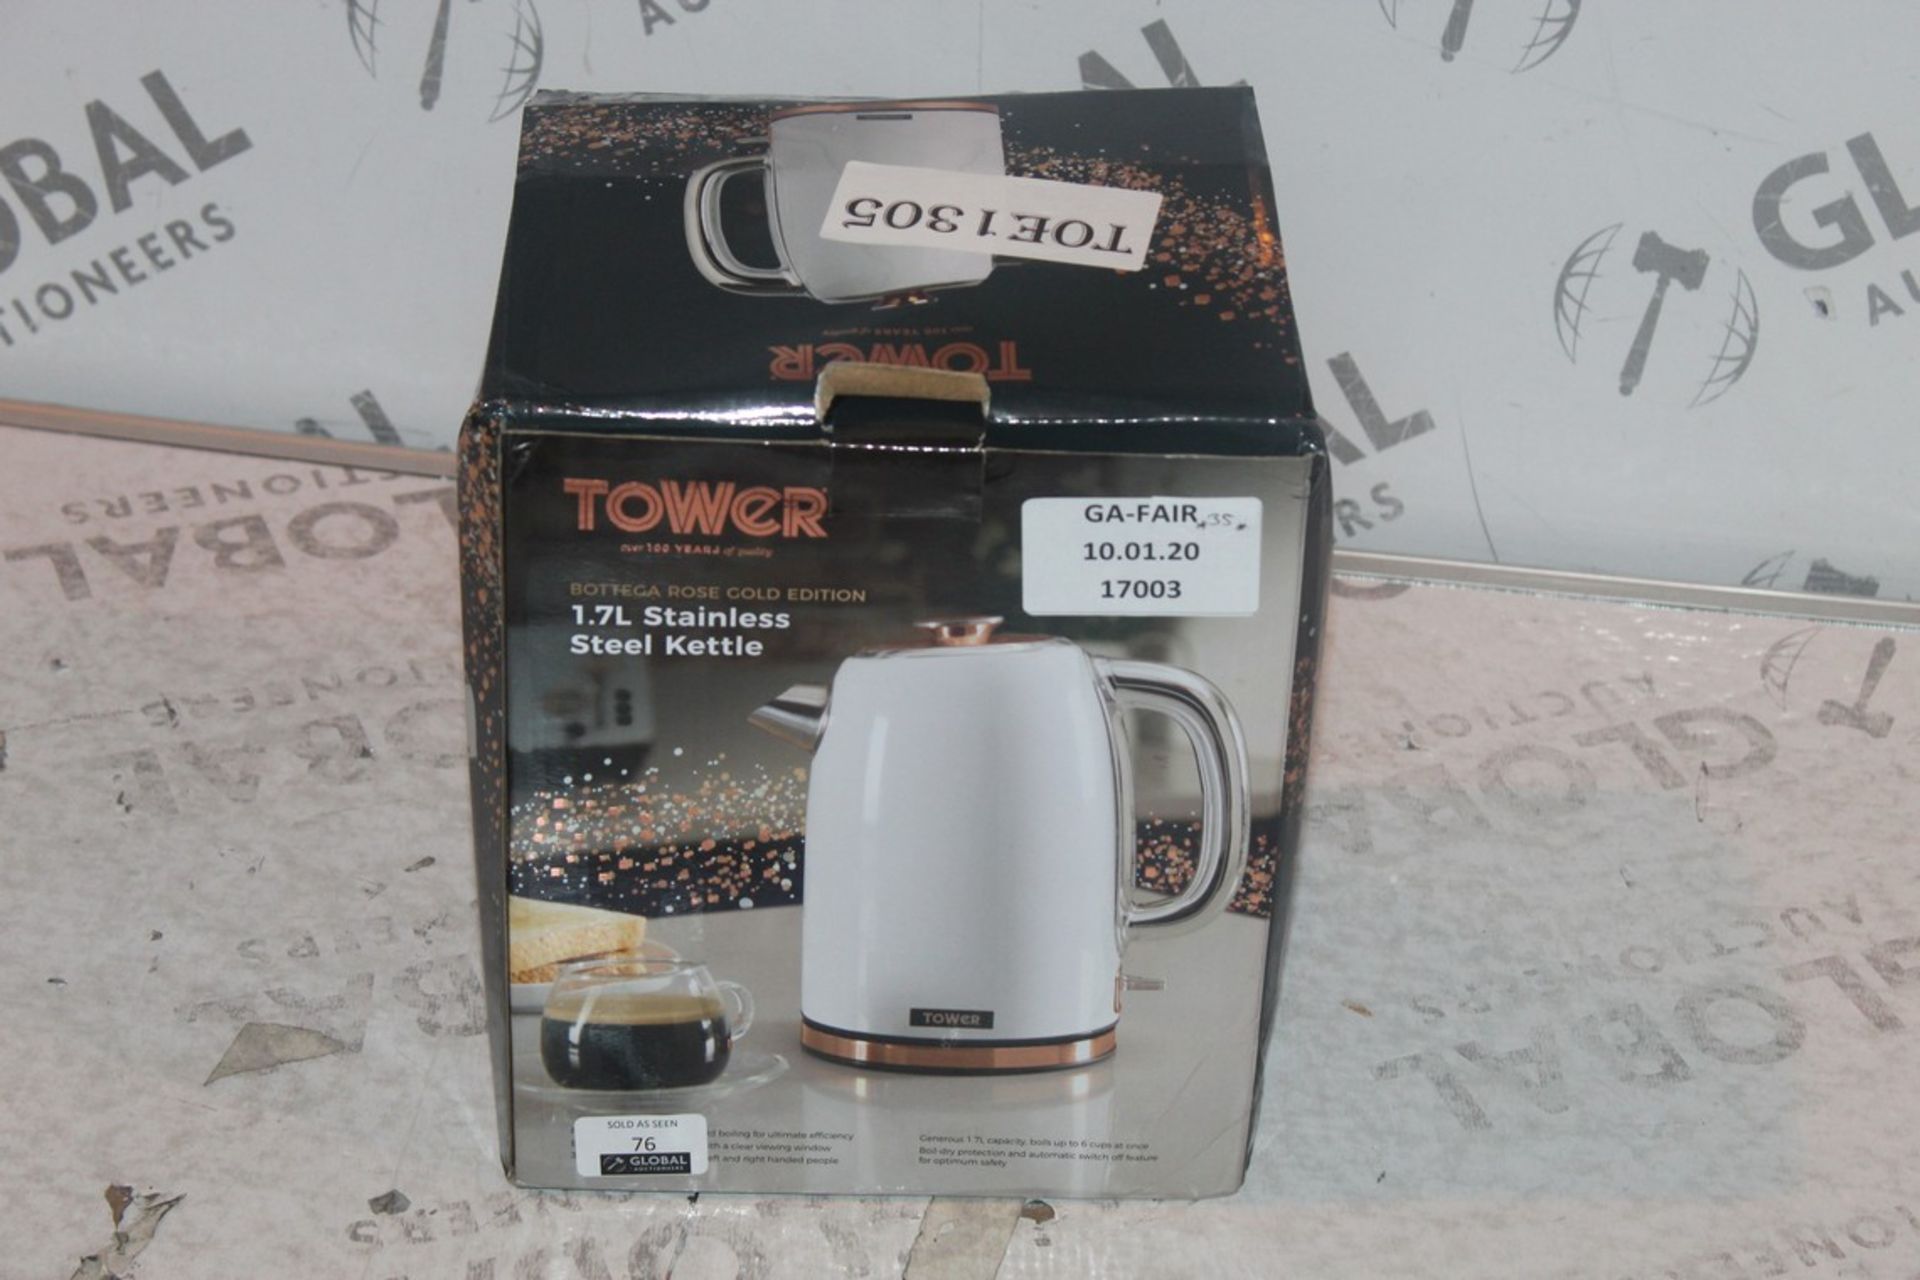 Boxed Tower 1.7L Stainless Steel Bottega Rose Gold Edition Kettle RRP £35 (17003) (Public Viewing